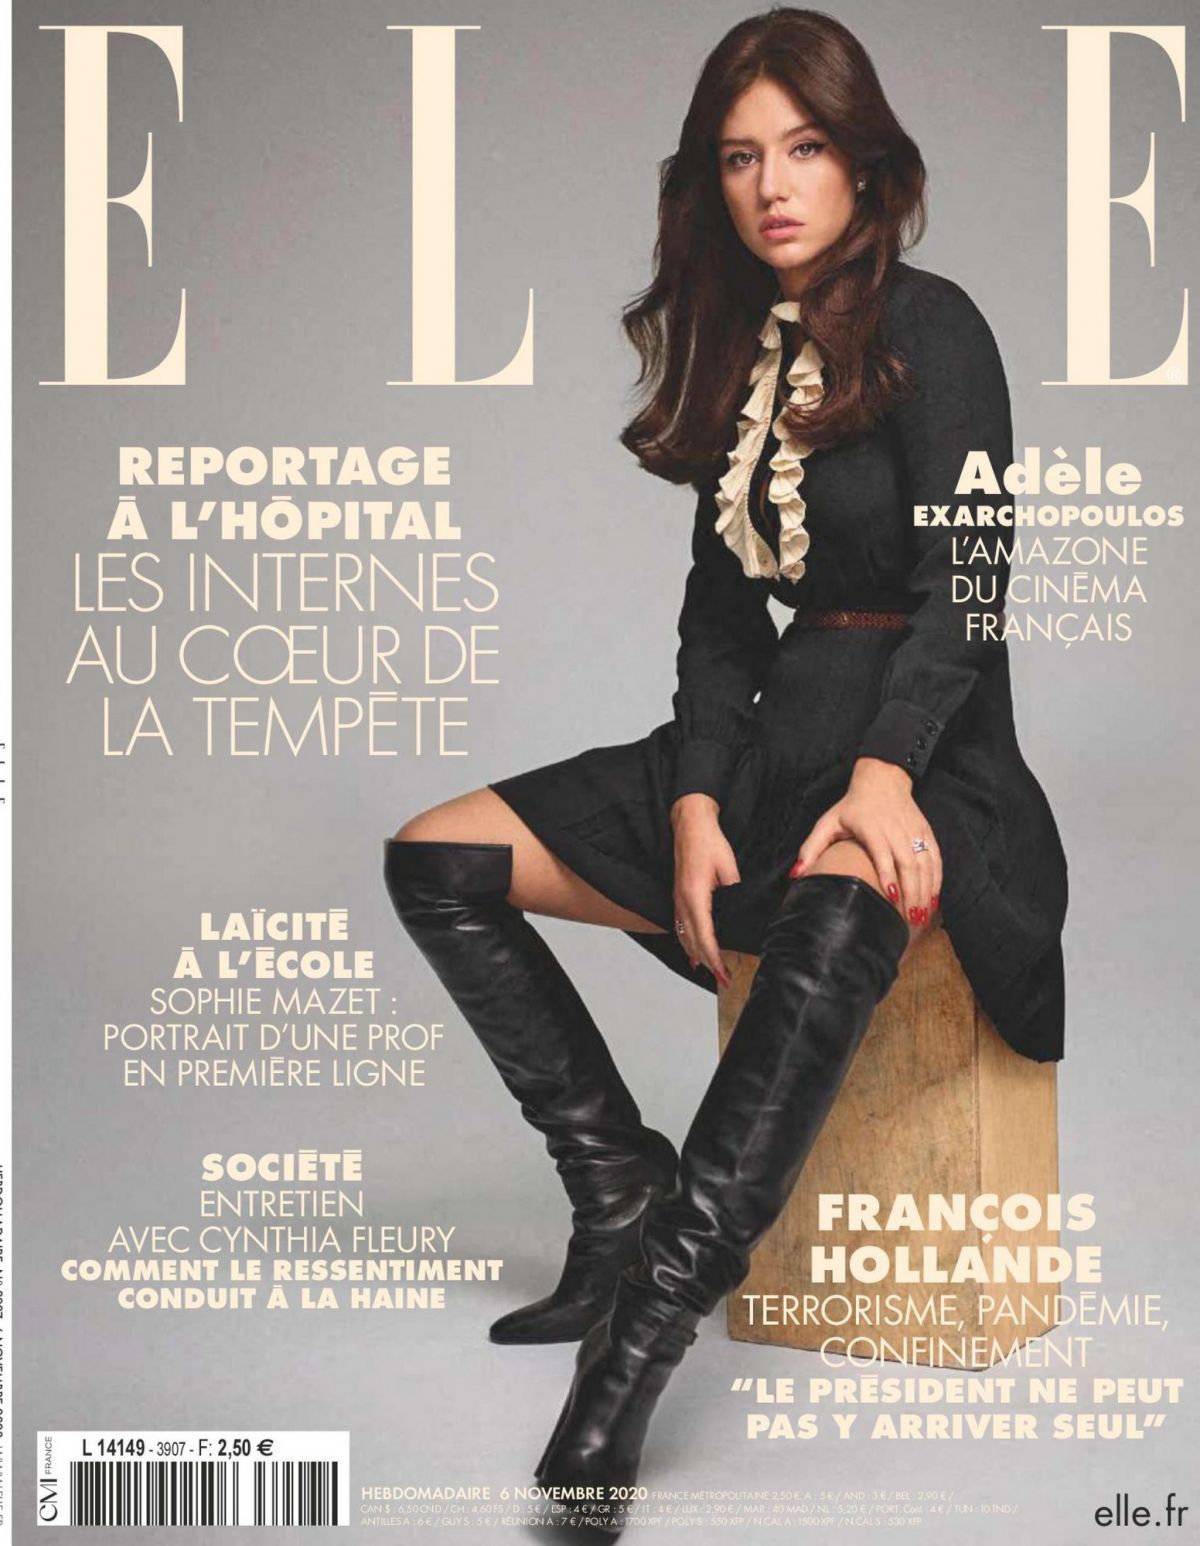 Adele Exarchopoulos for ELLE France (May 2015)